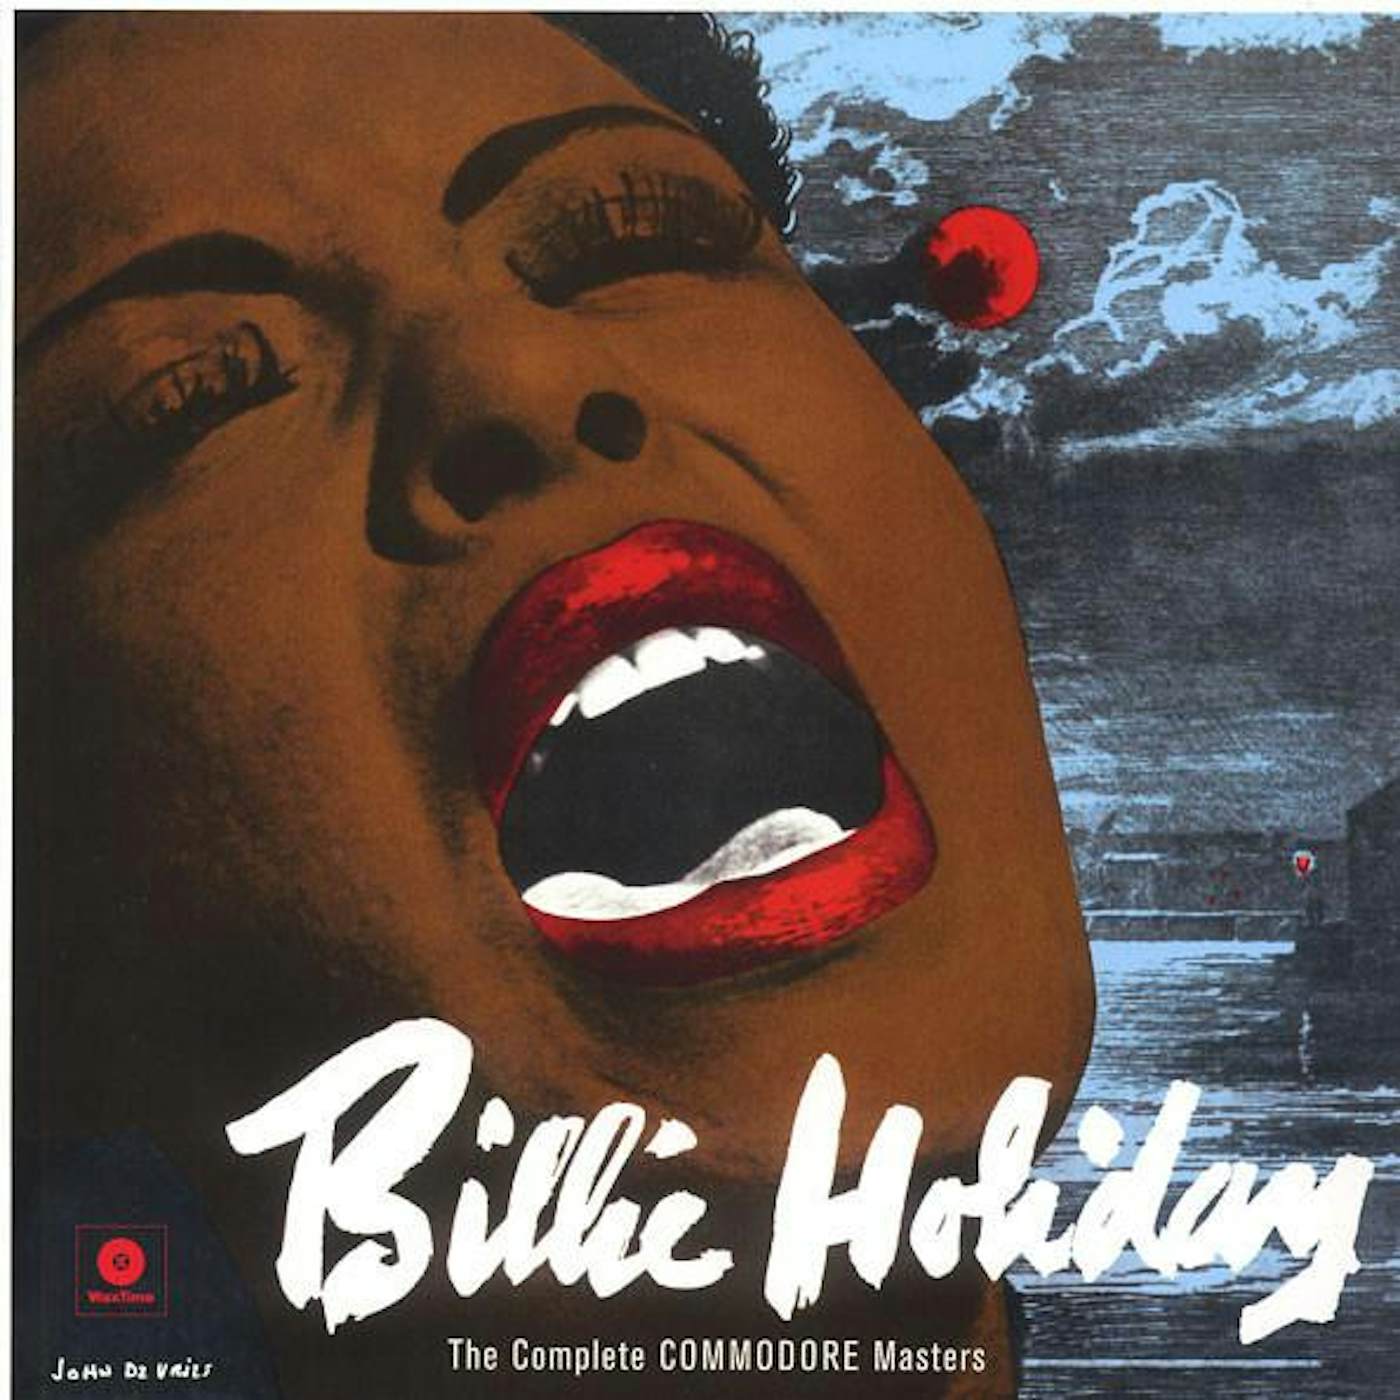 Billie Holiday COMPLETE COMMODORE MASTERS Vinyl Record